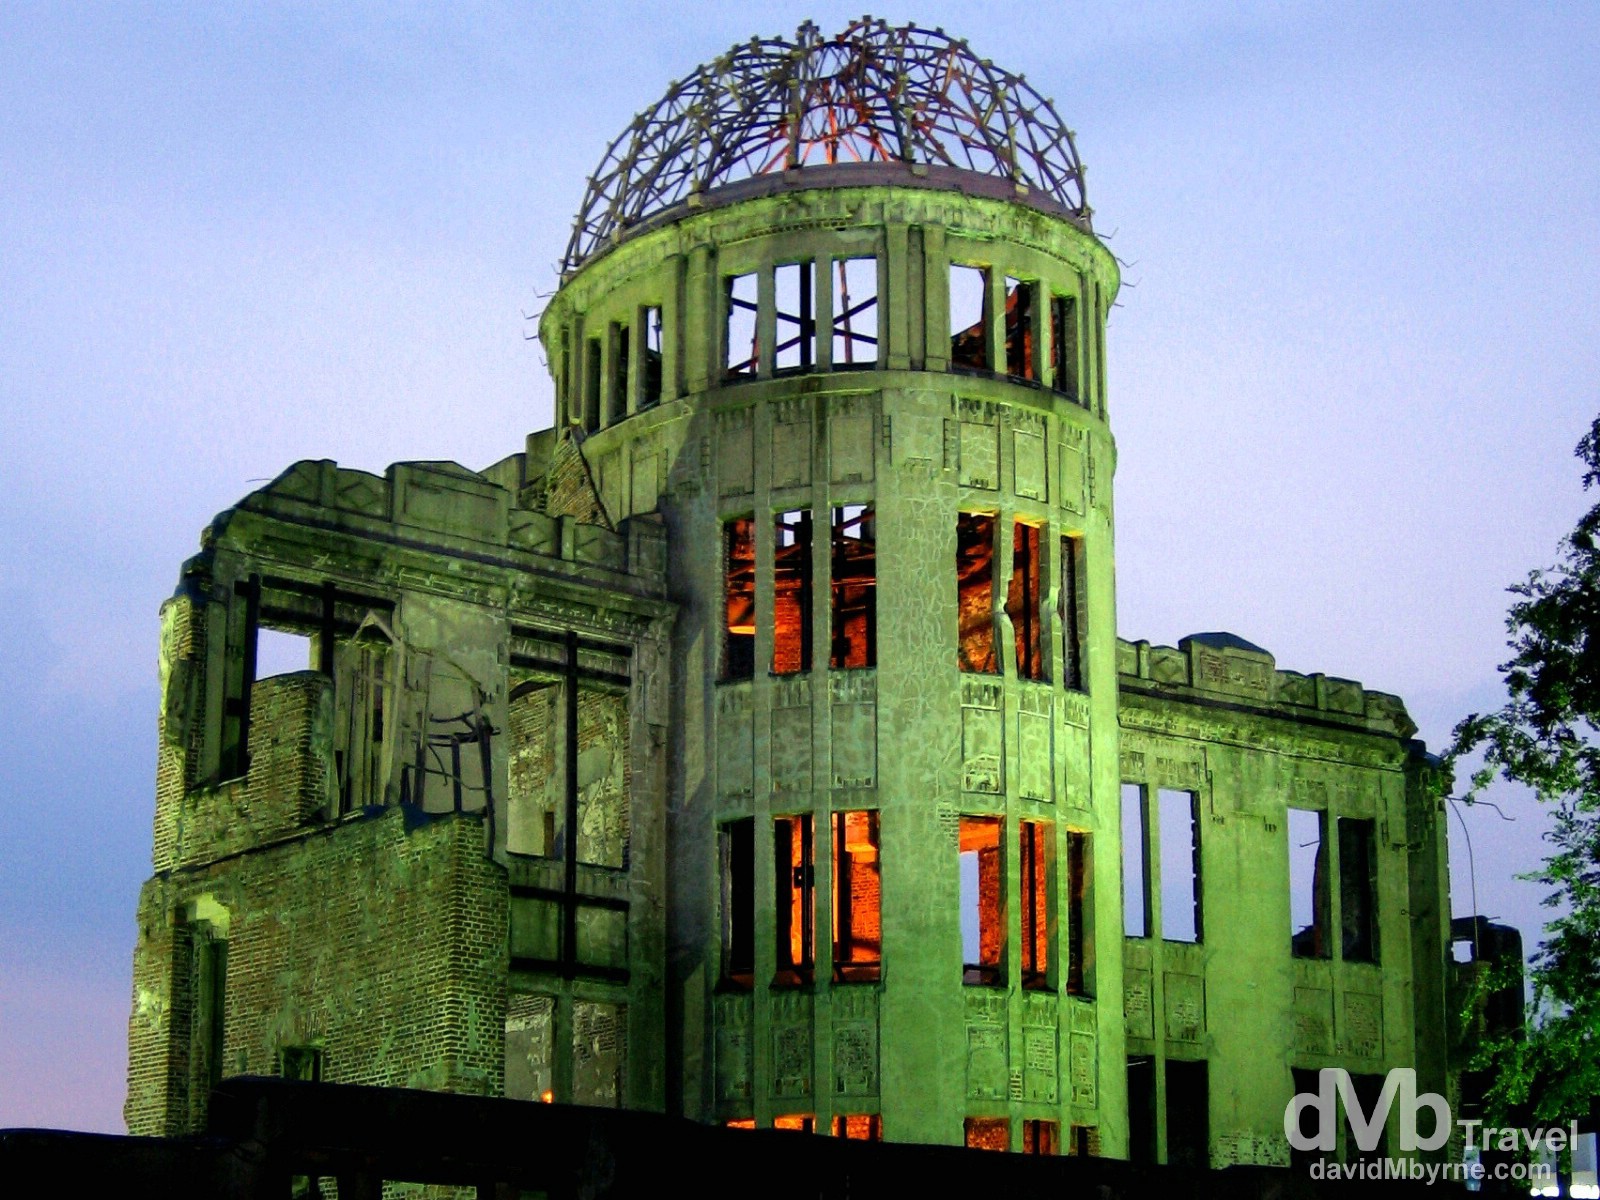 The A-bomb Dome by the he Aioi River, the most famous landmark in Hiroshima, Honshu, Japan. July 22nd, 2005.